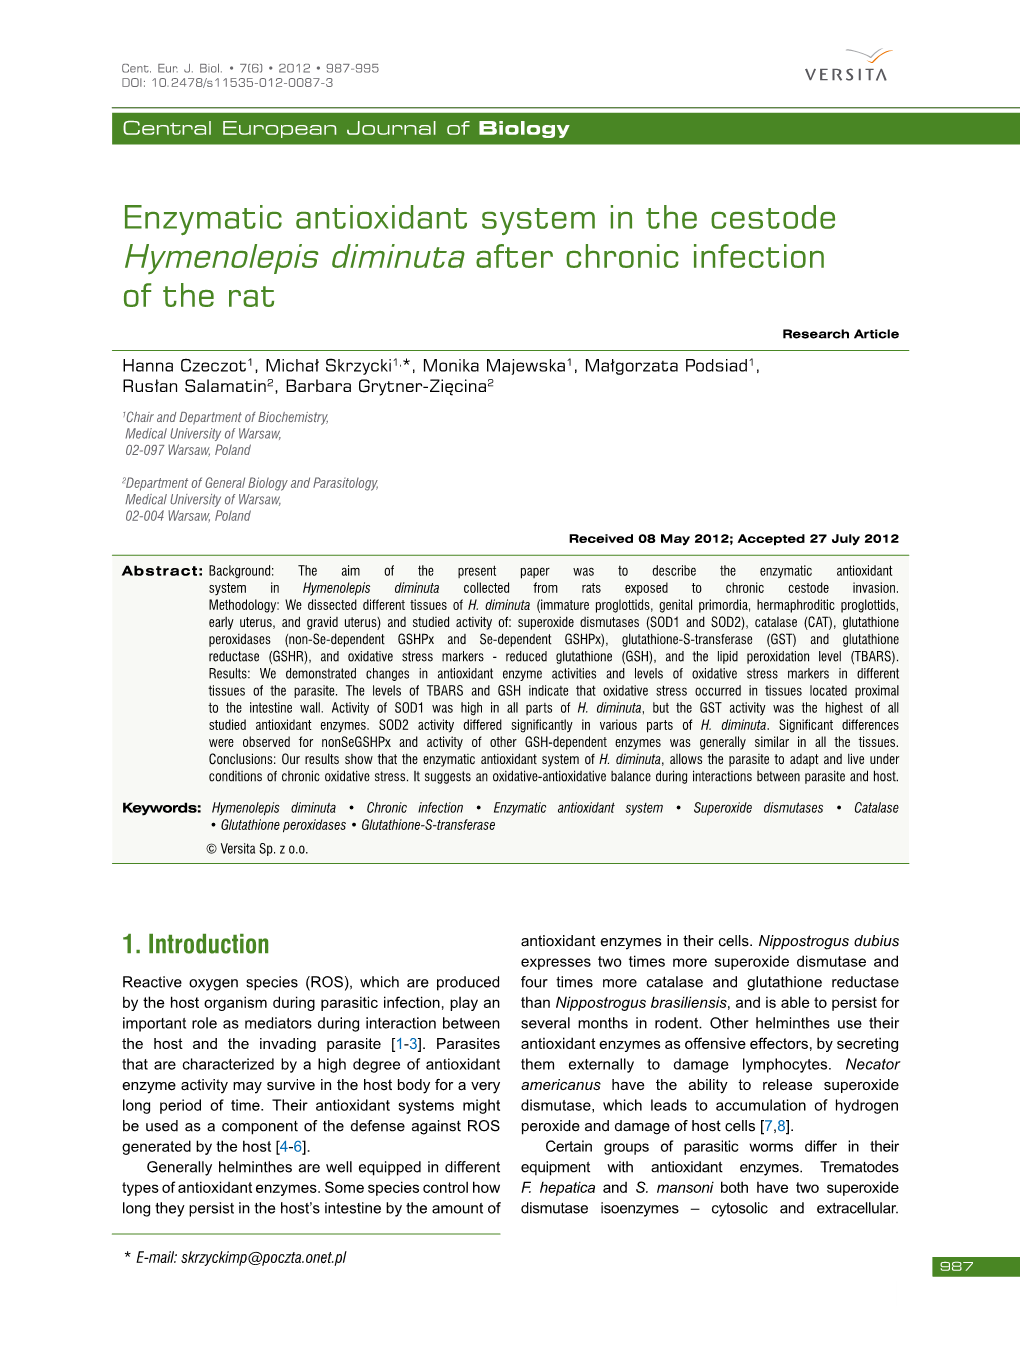 Enzymatic Antioxidant System in the Cestode Hymenolepis Diminuta After Chronic Infection of the Rat